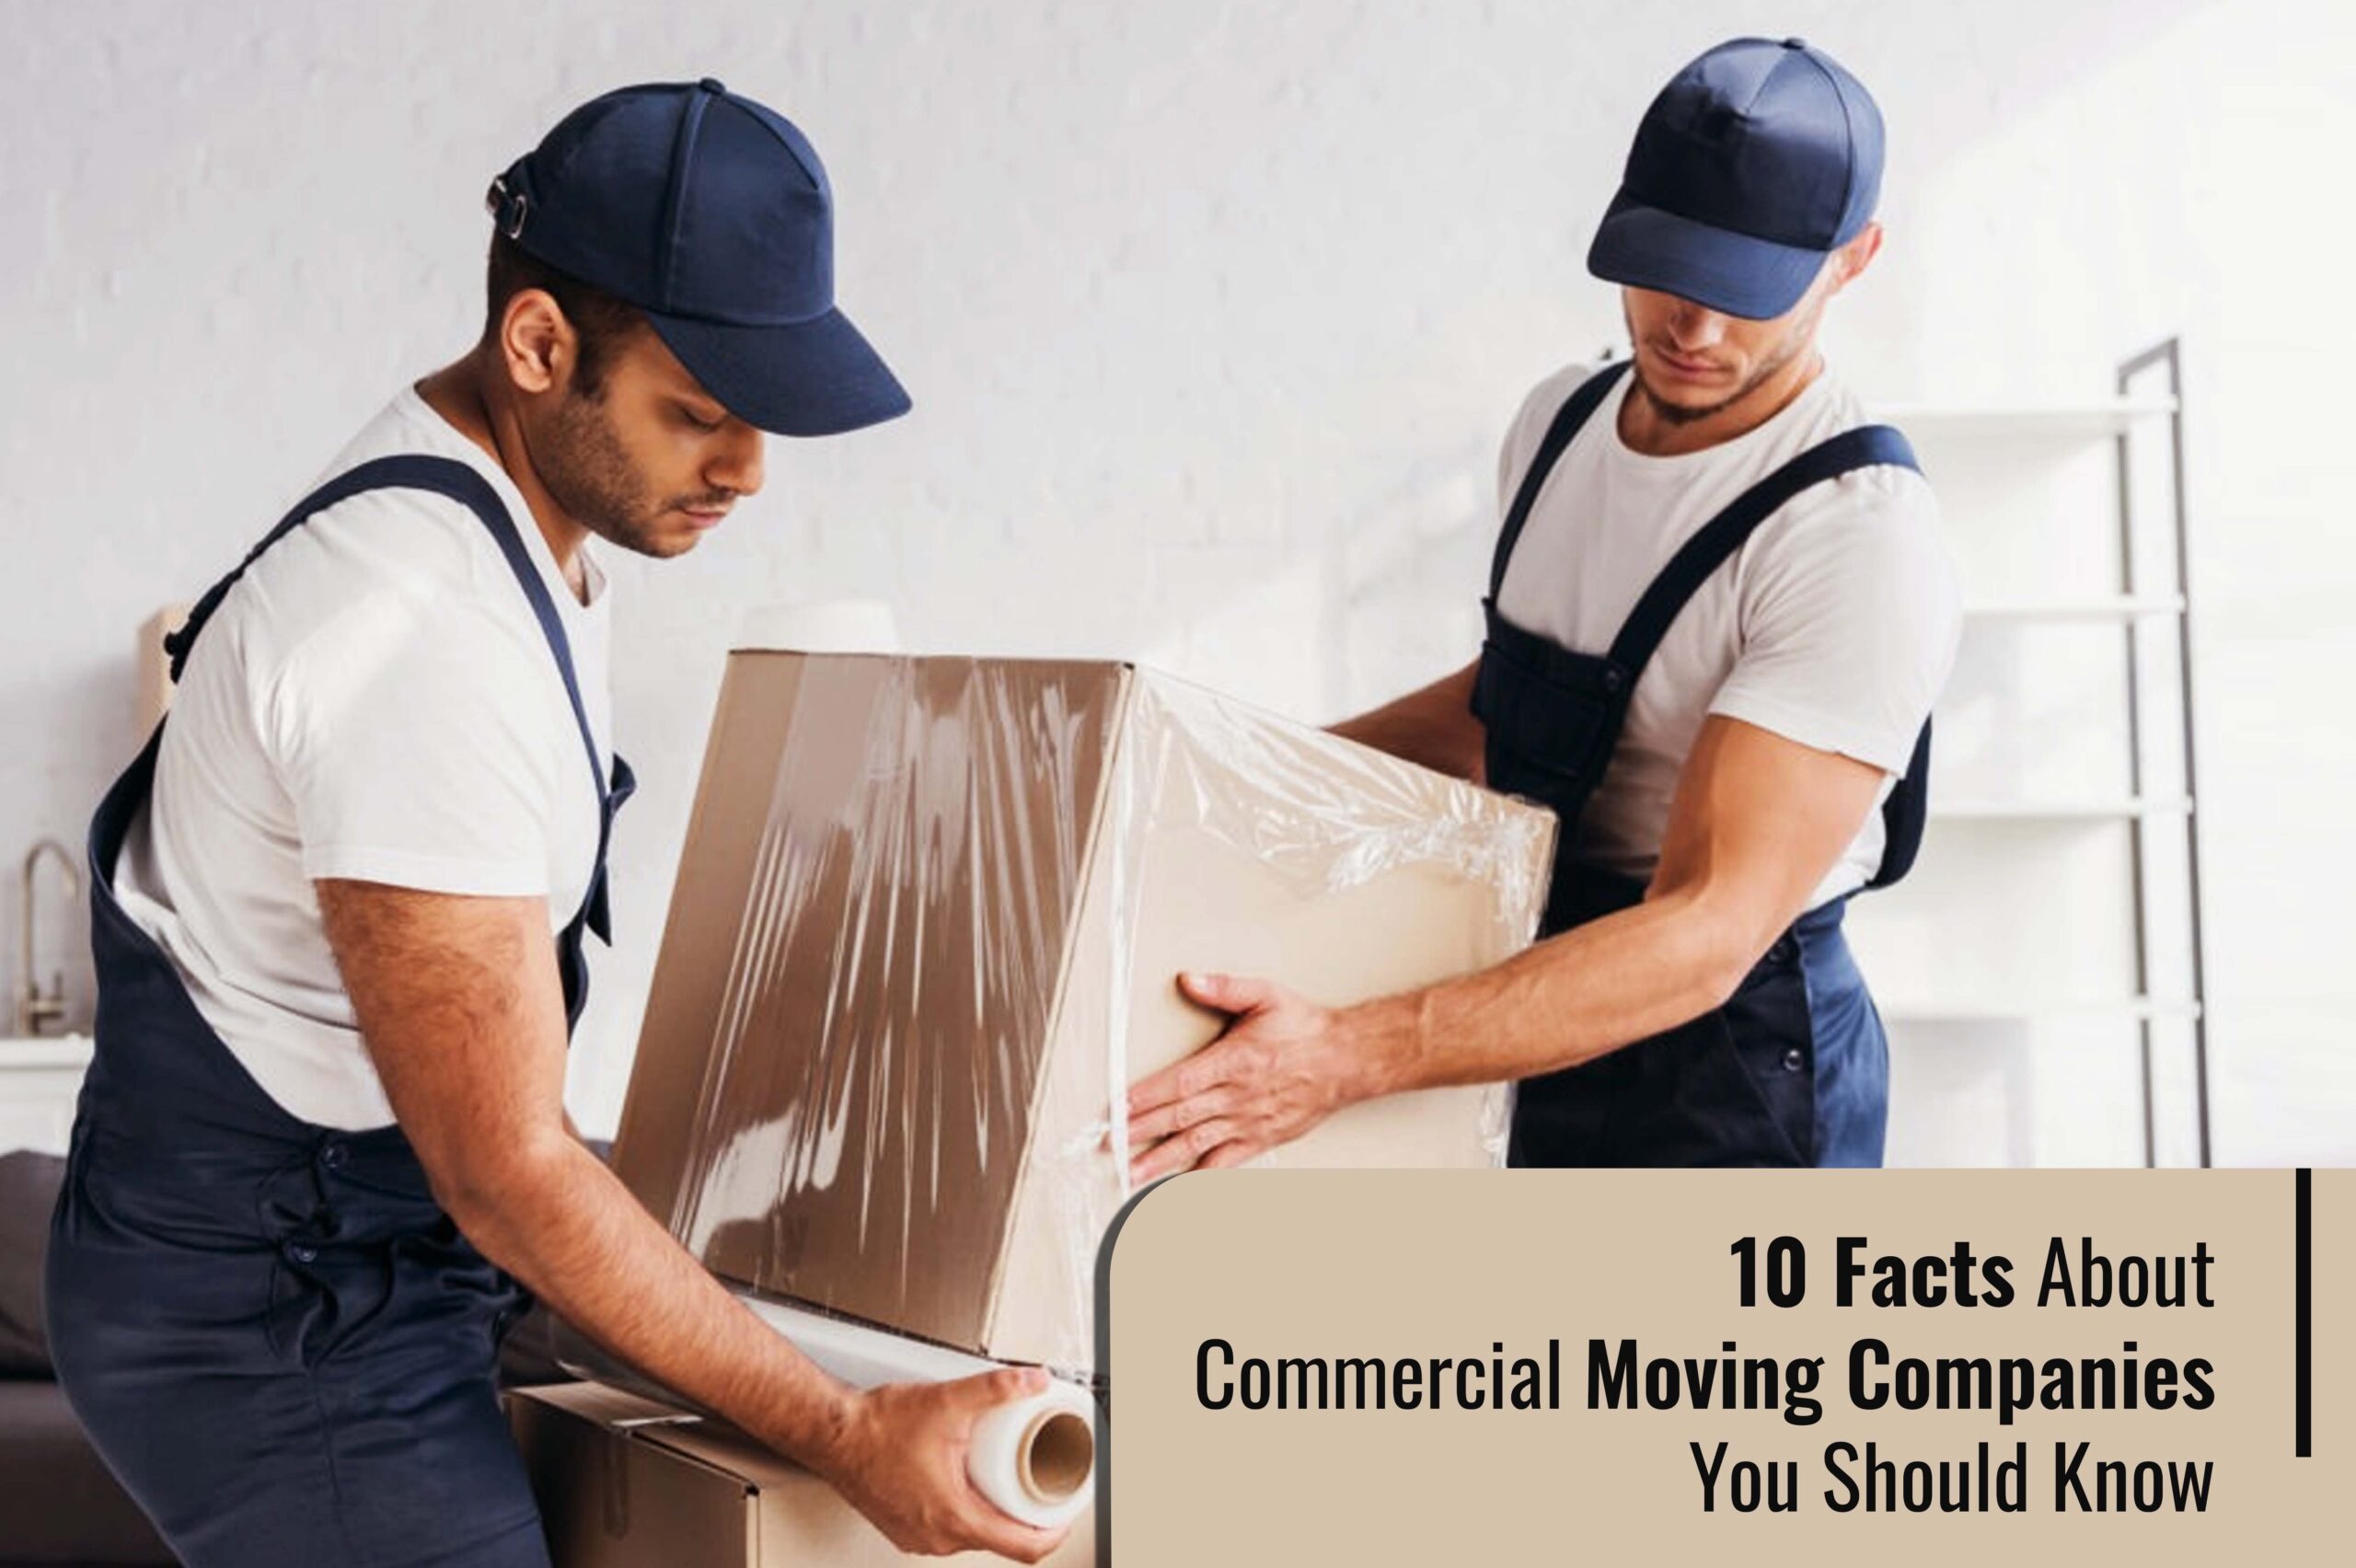 10 Facts About Commercial Moving Companies You Should Know